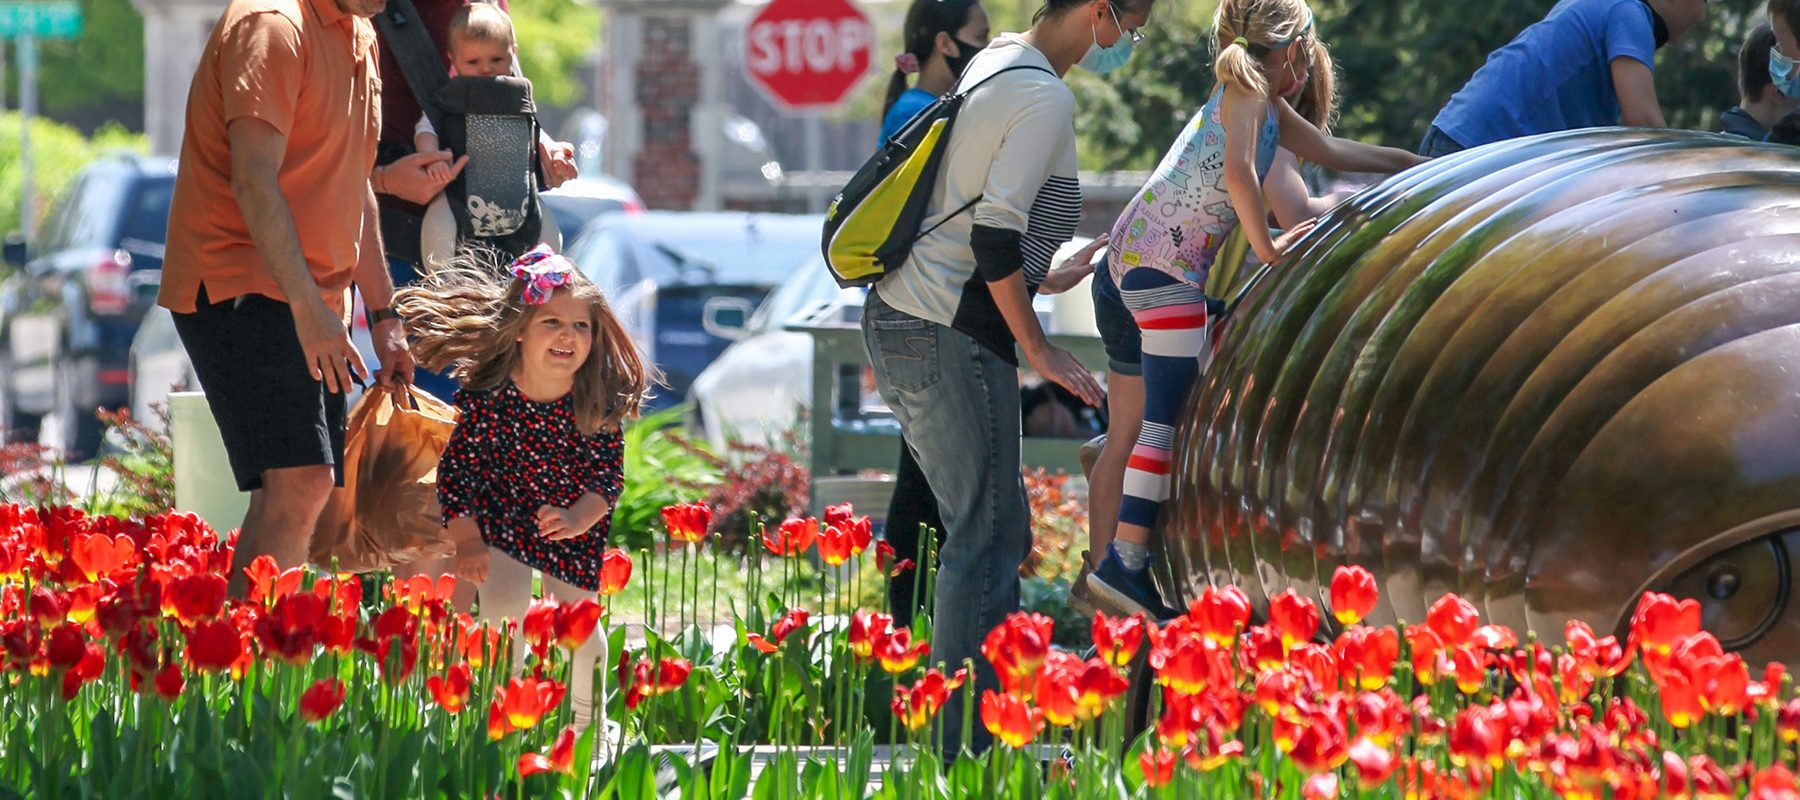 Family enjoying an outdoor sculpture surrounded by tulips at Ulrich Family Fun Day